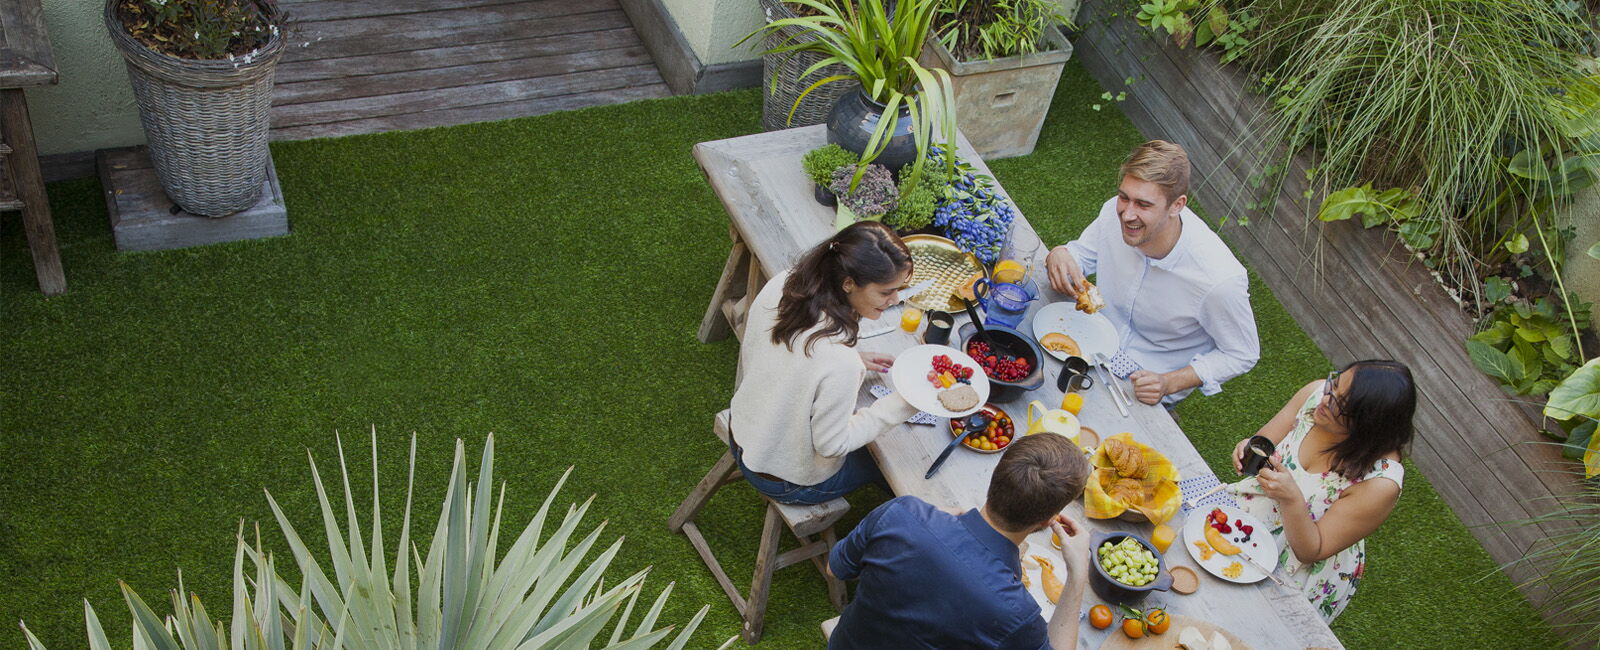 Rooftop terrace in grass, friends eating